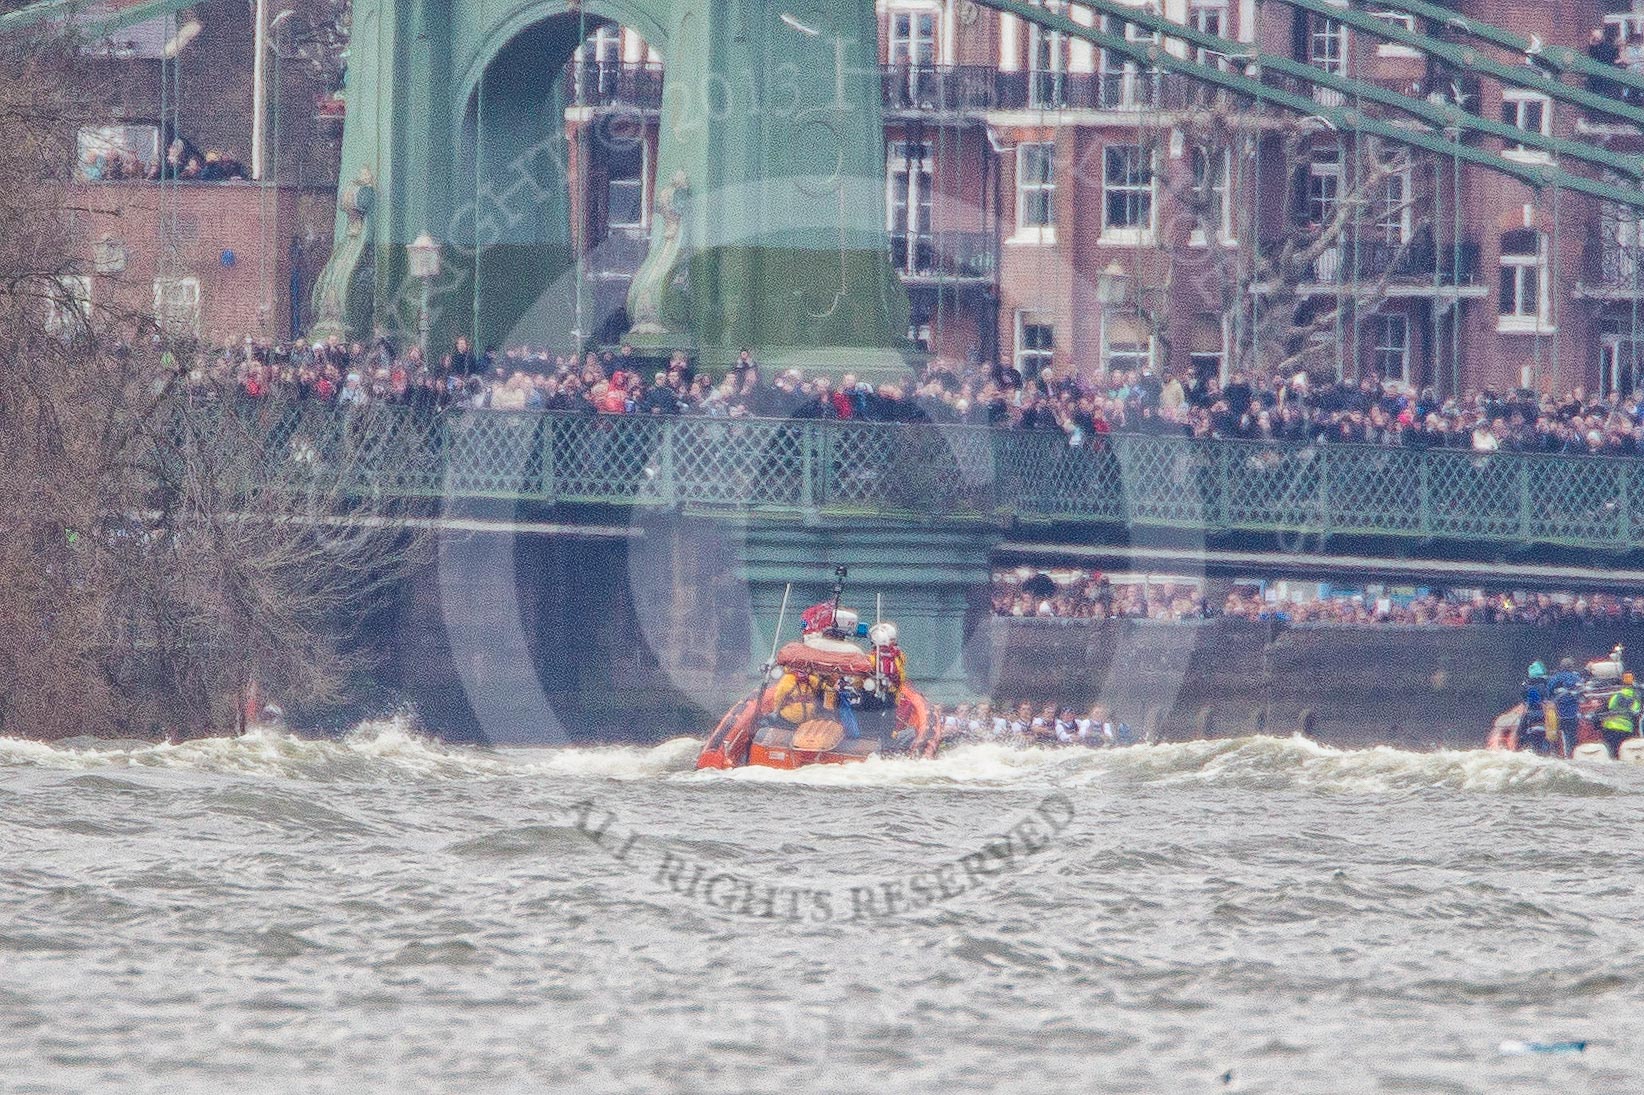 The Boat Race 2013.
Putney,
London SW15,

United Kingdom,
on 31 March 2013 at 16:37, image #348